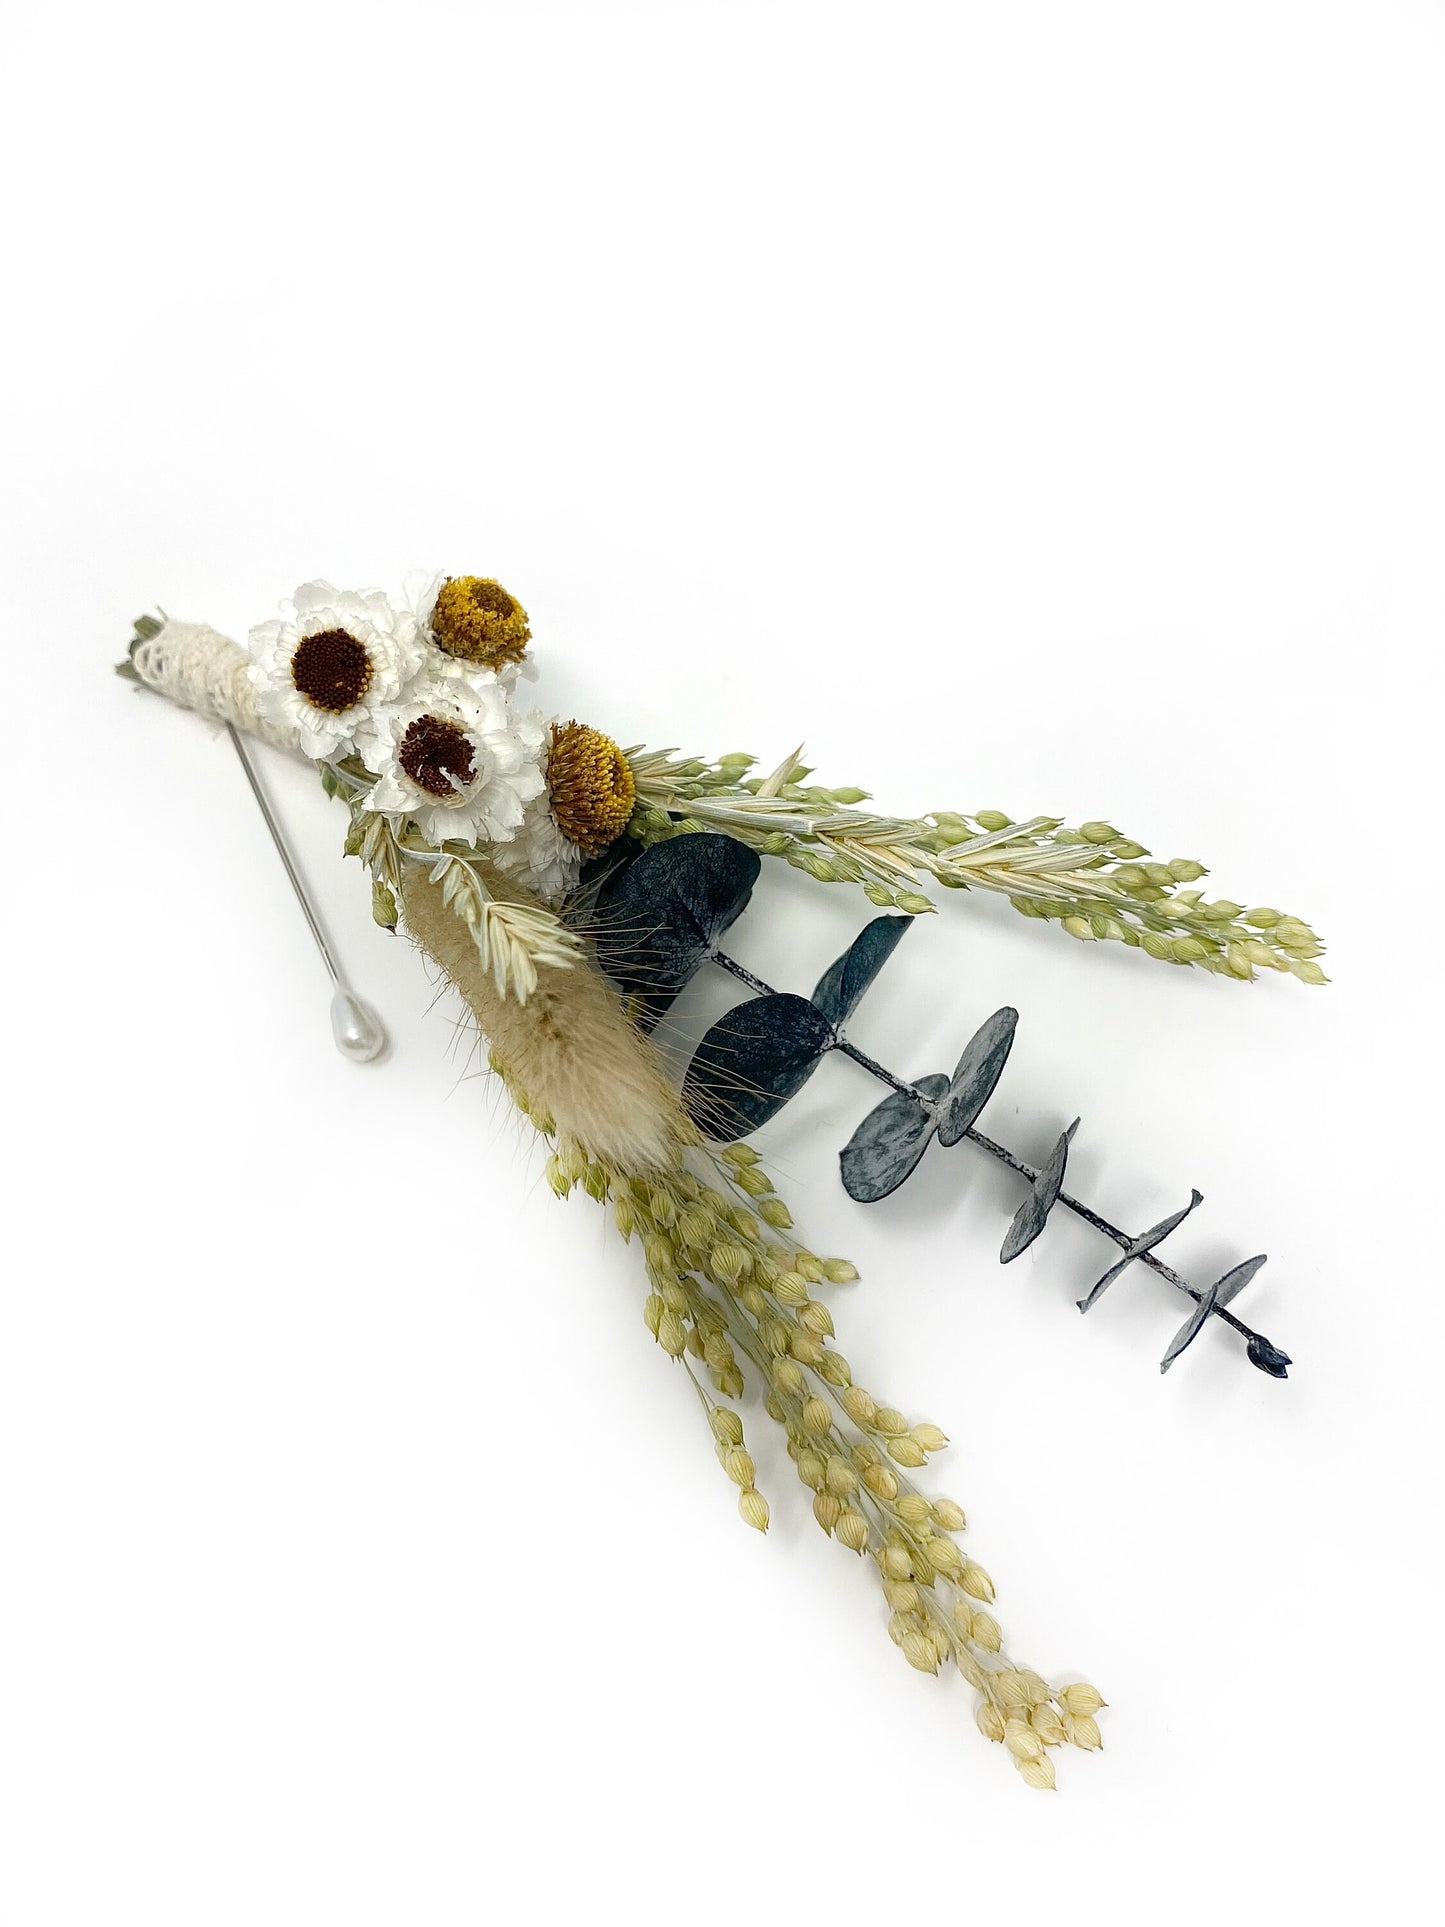 Wedding Boutonniere, Dried Flowers, Preserved Flowers, Bunny Tails, Decor, White and Green, Bridal Accessories